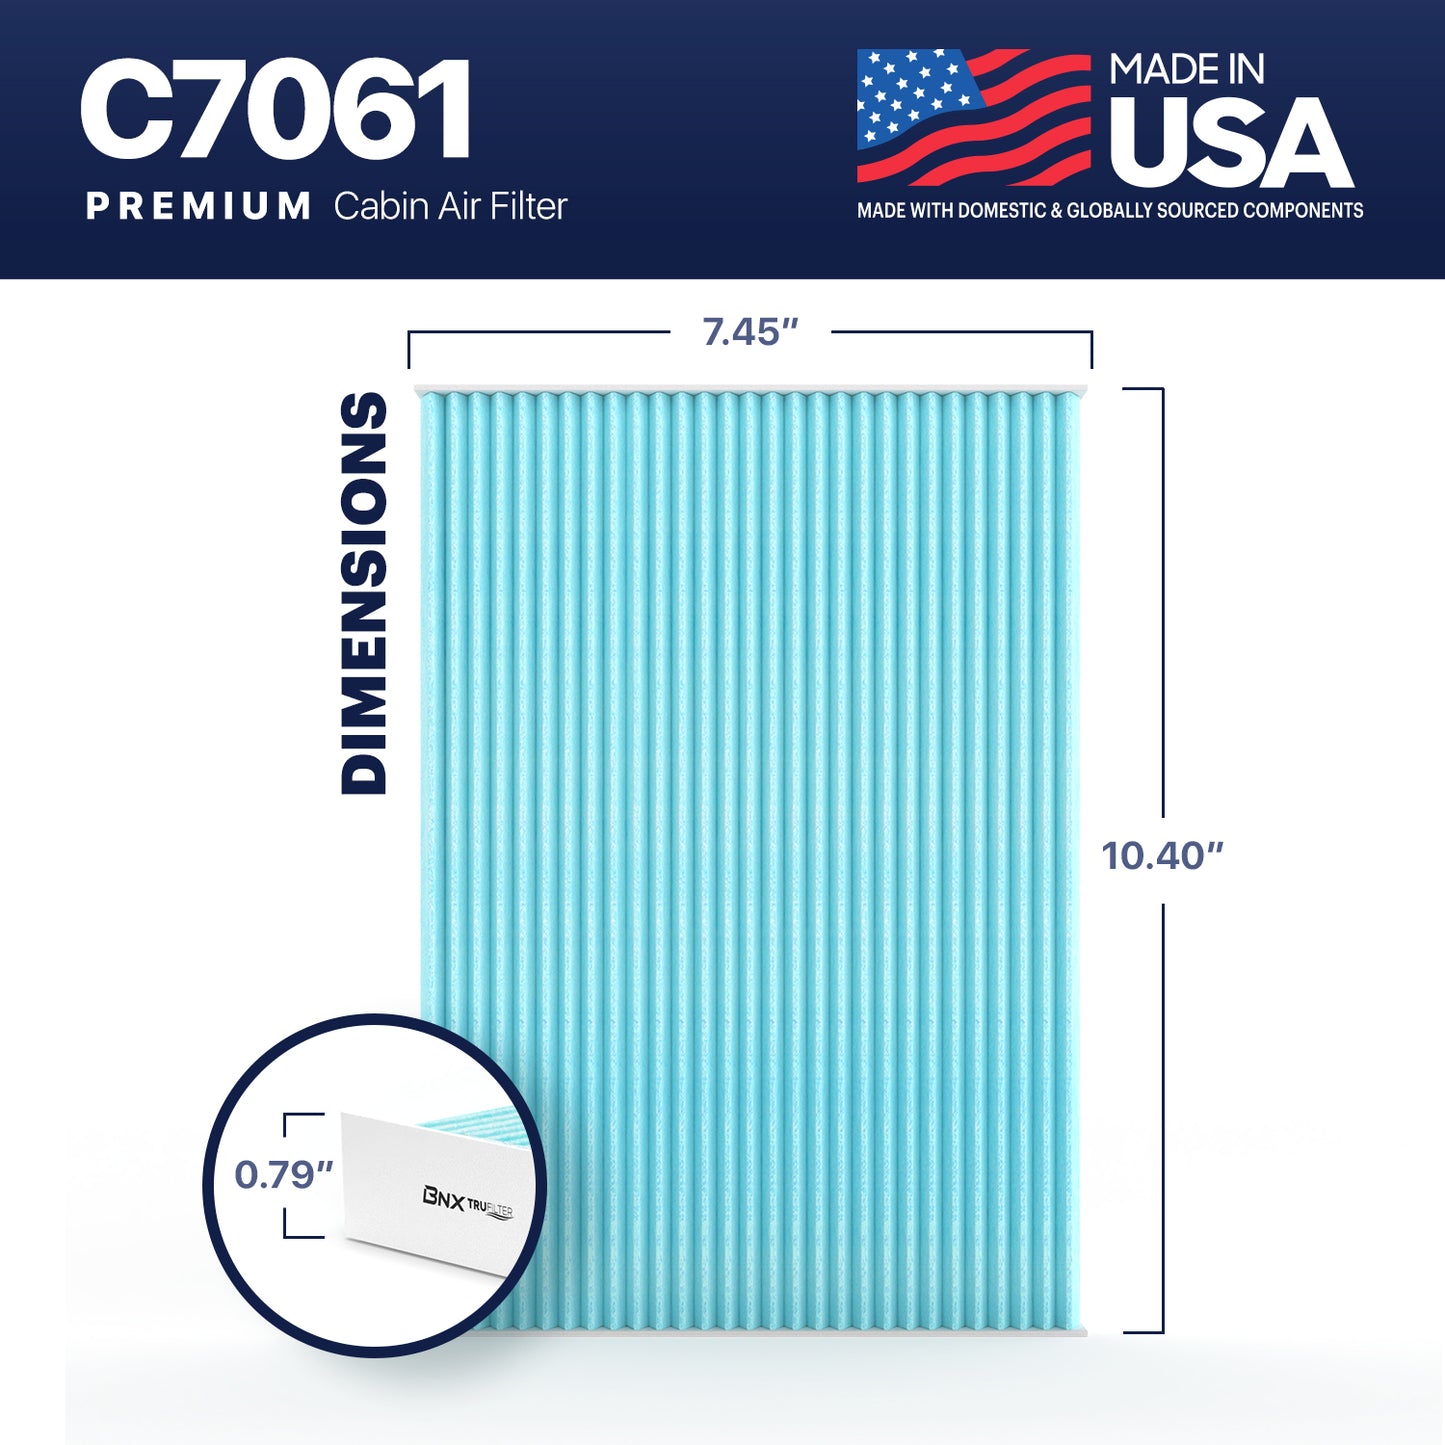 BNX TruFilter C7061 Cabin Air Filter, HEPA 99.97%, MADE IN USA, Compatible With Nissan: Sentra, Rogue